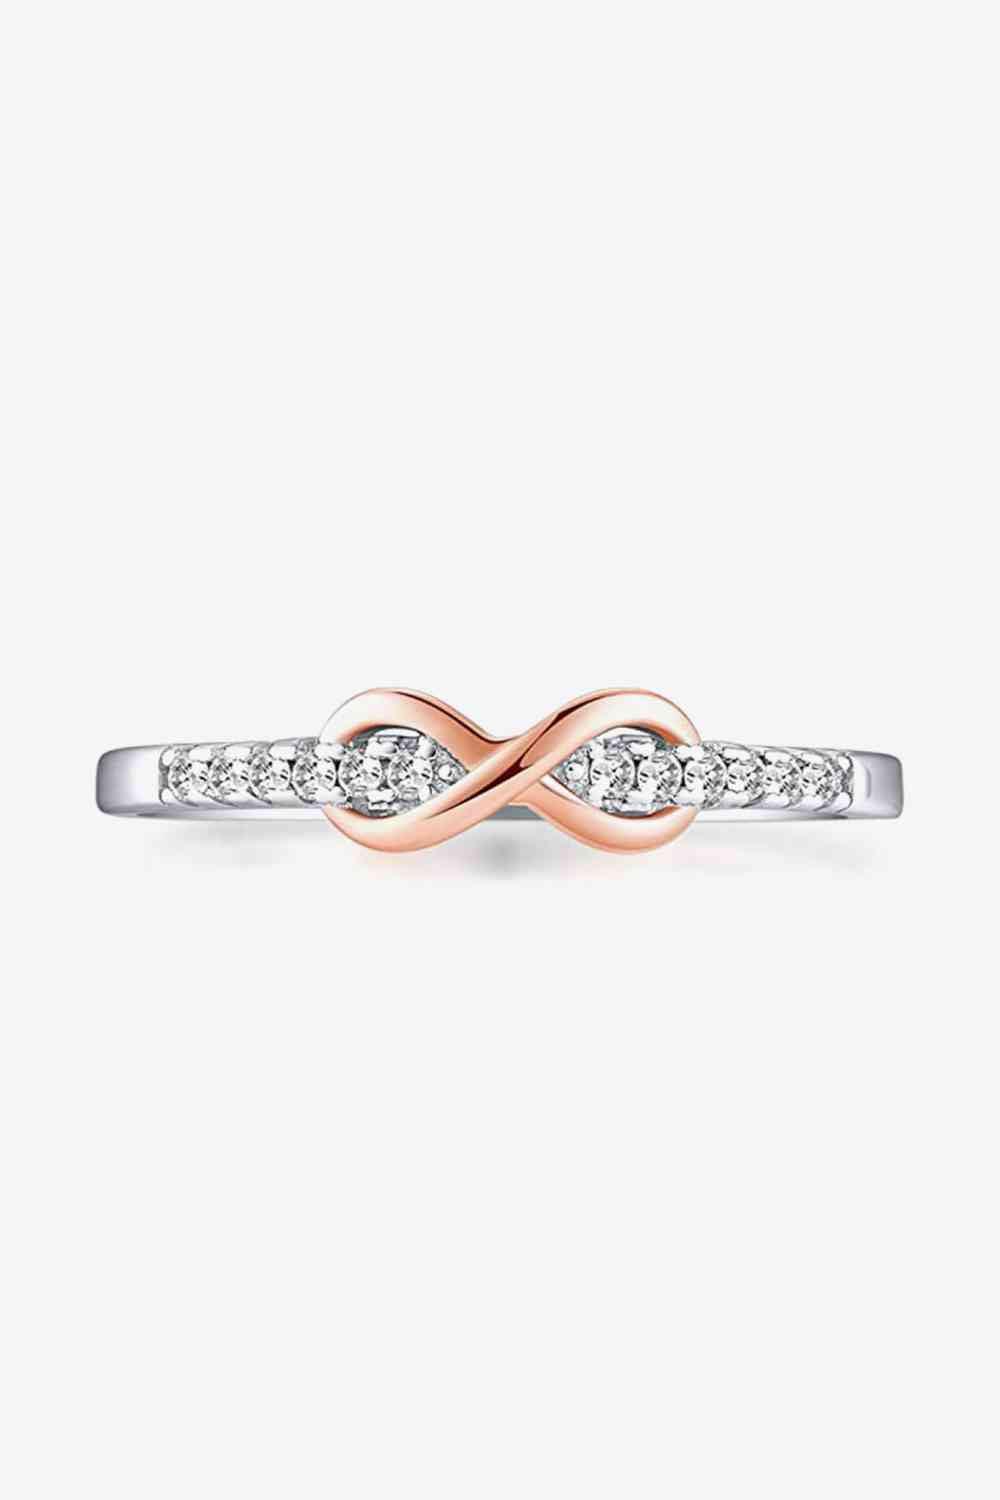 Infinity Loop Zircon 925 Sterling Silver Ring - God's Girl Gifts And Apparel